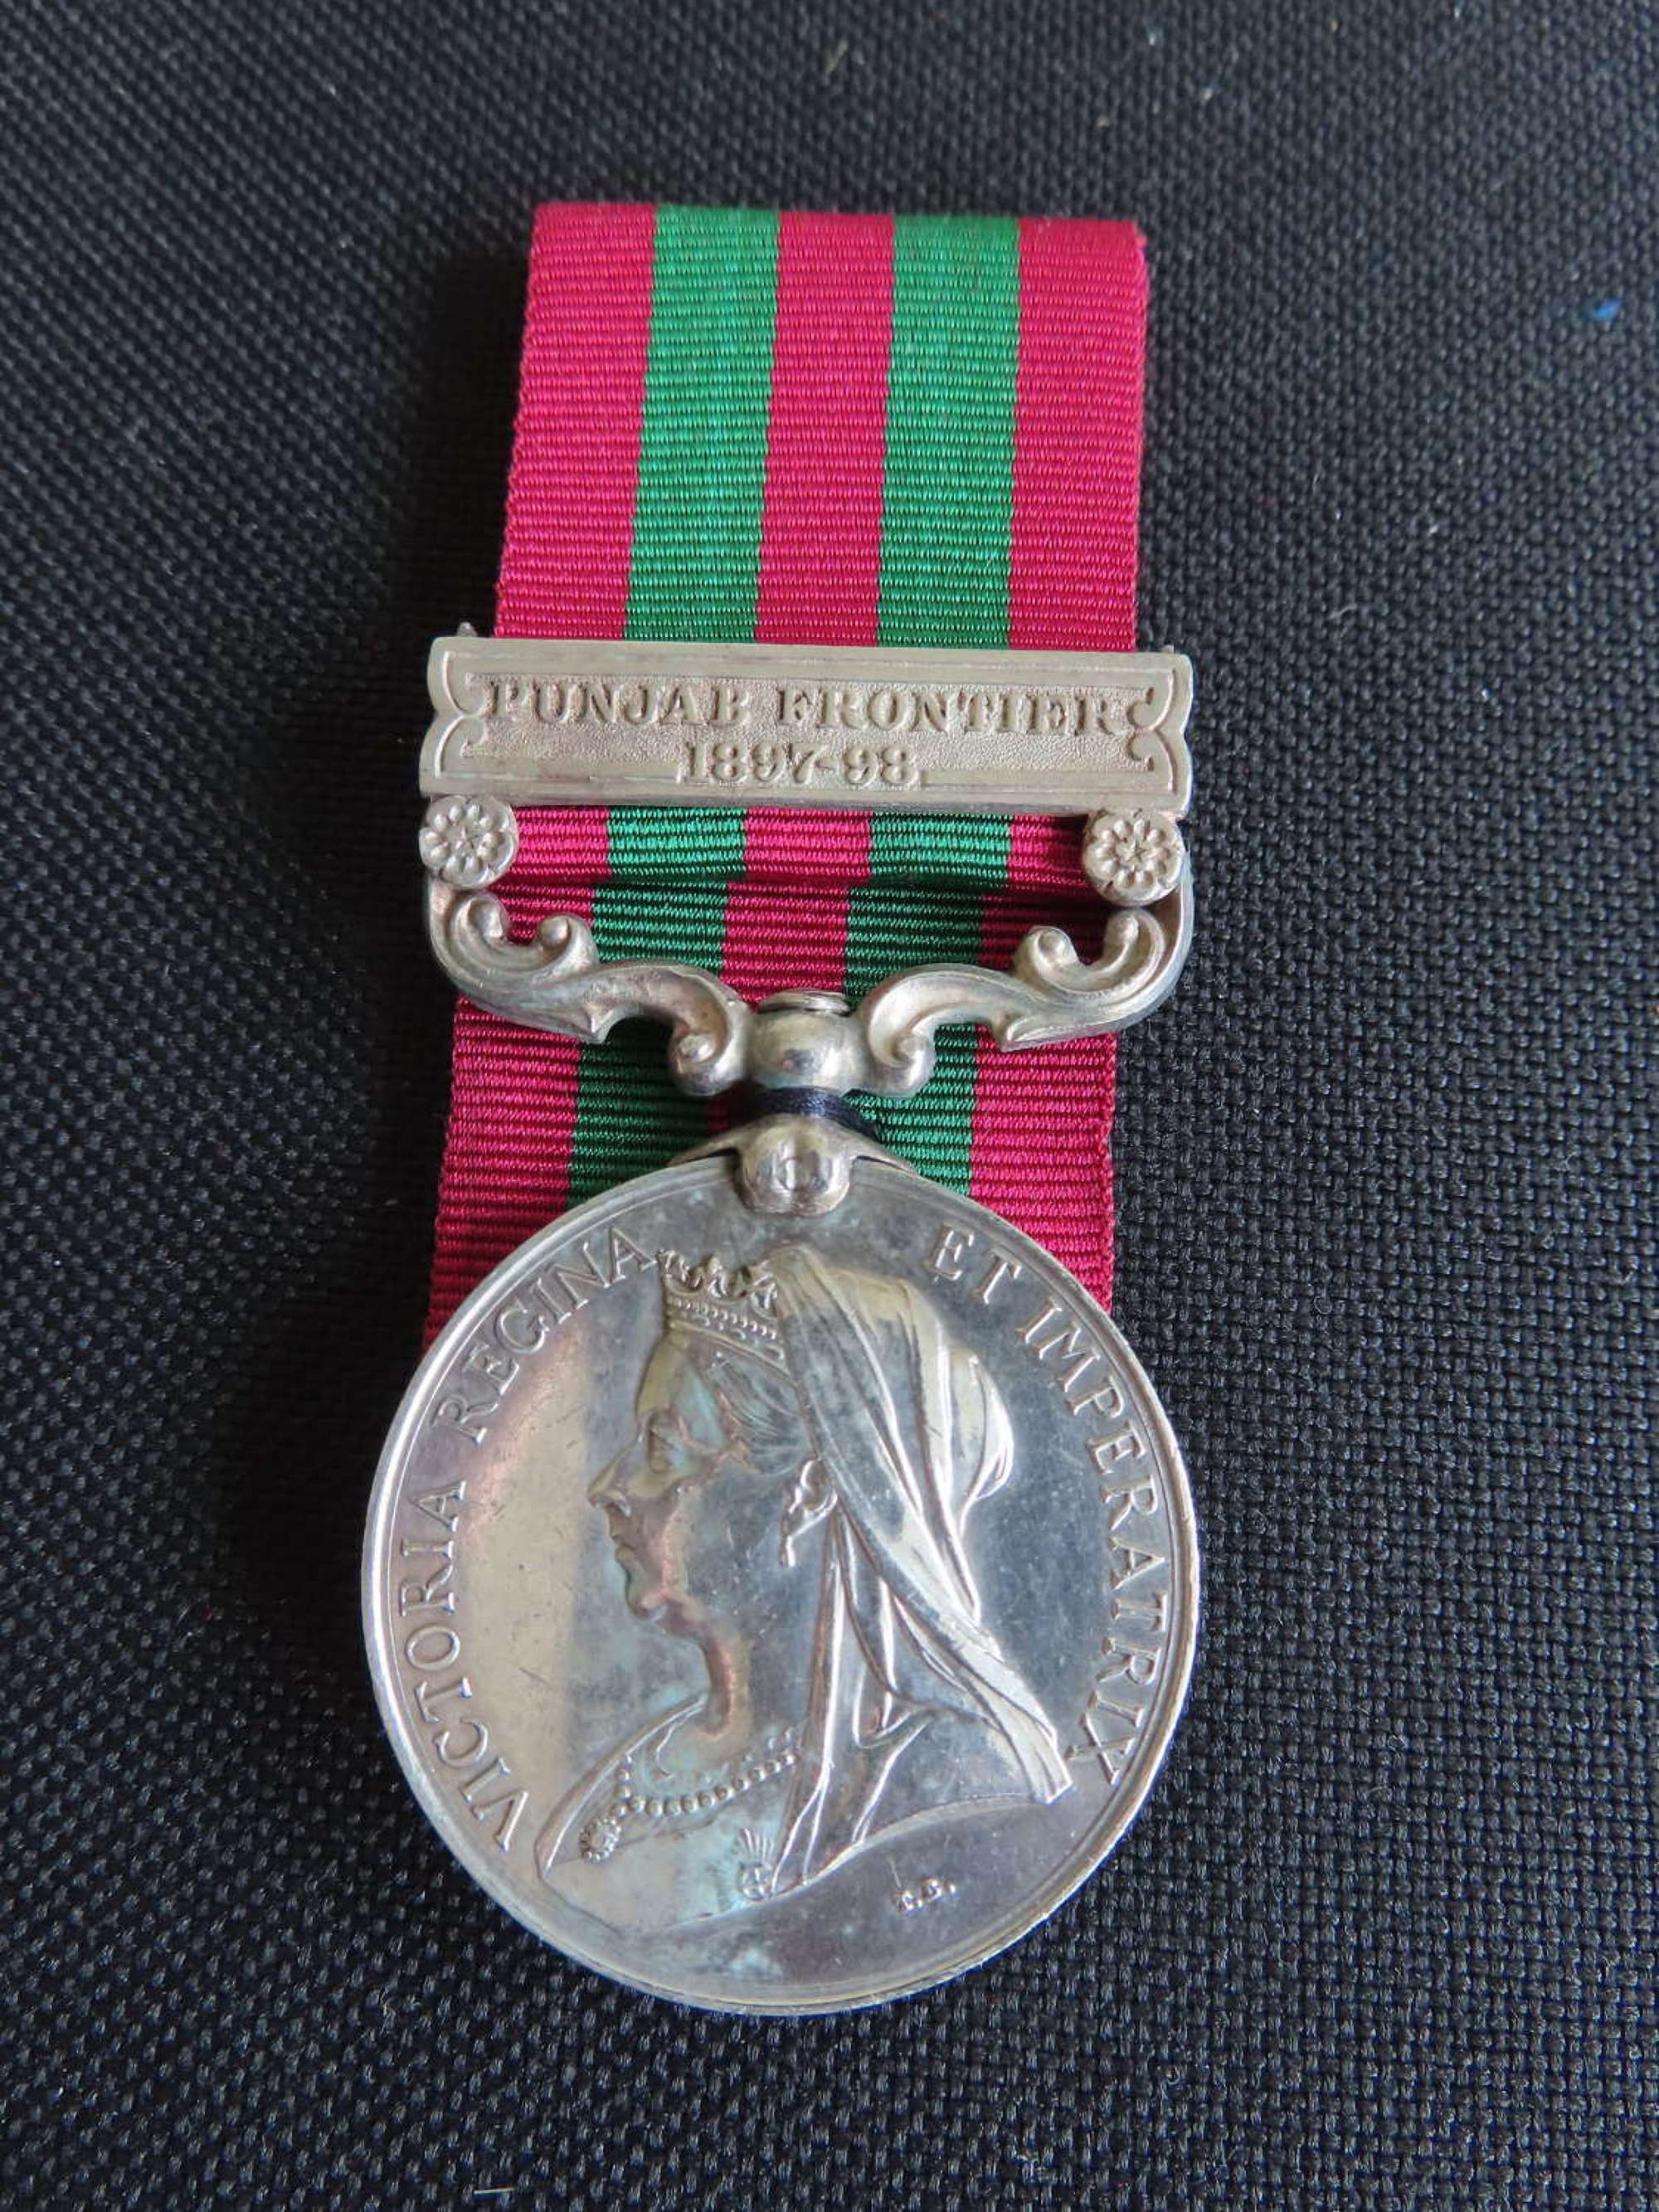 1897-98 Punjab Frontier India medal awarded to 1883 Pte G Dean Rifle B